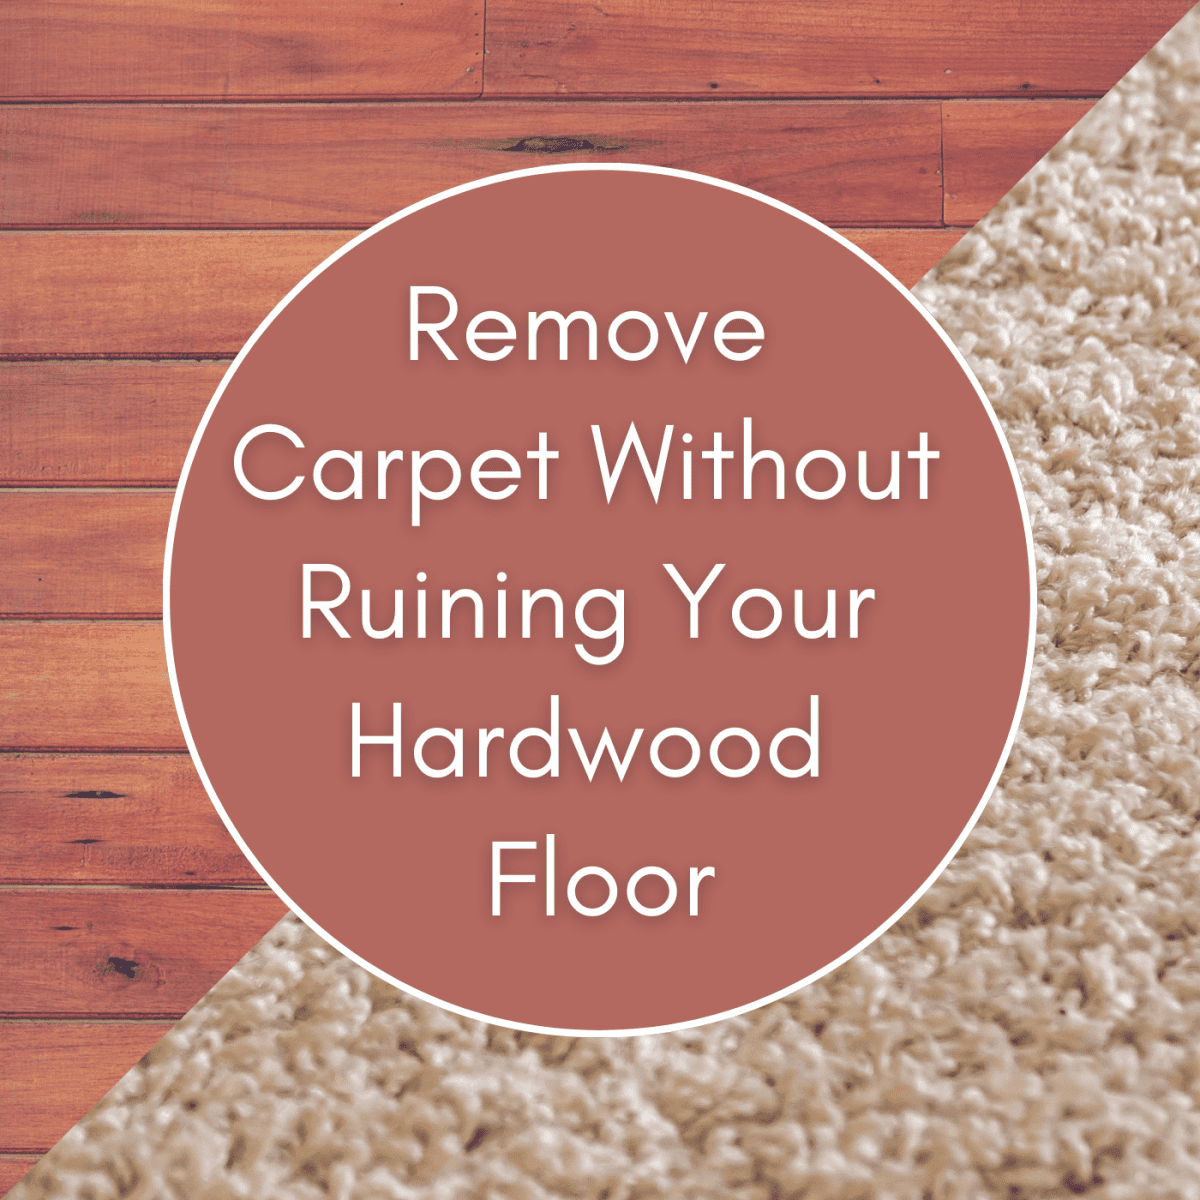 How To Remove Carpet Without Ruining, Hardwood Floors Under Carpet